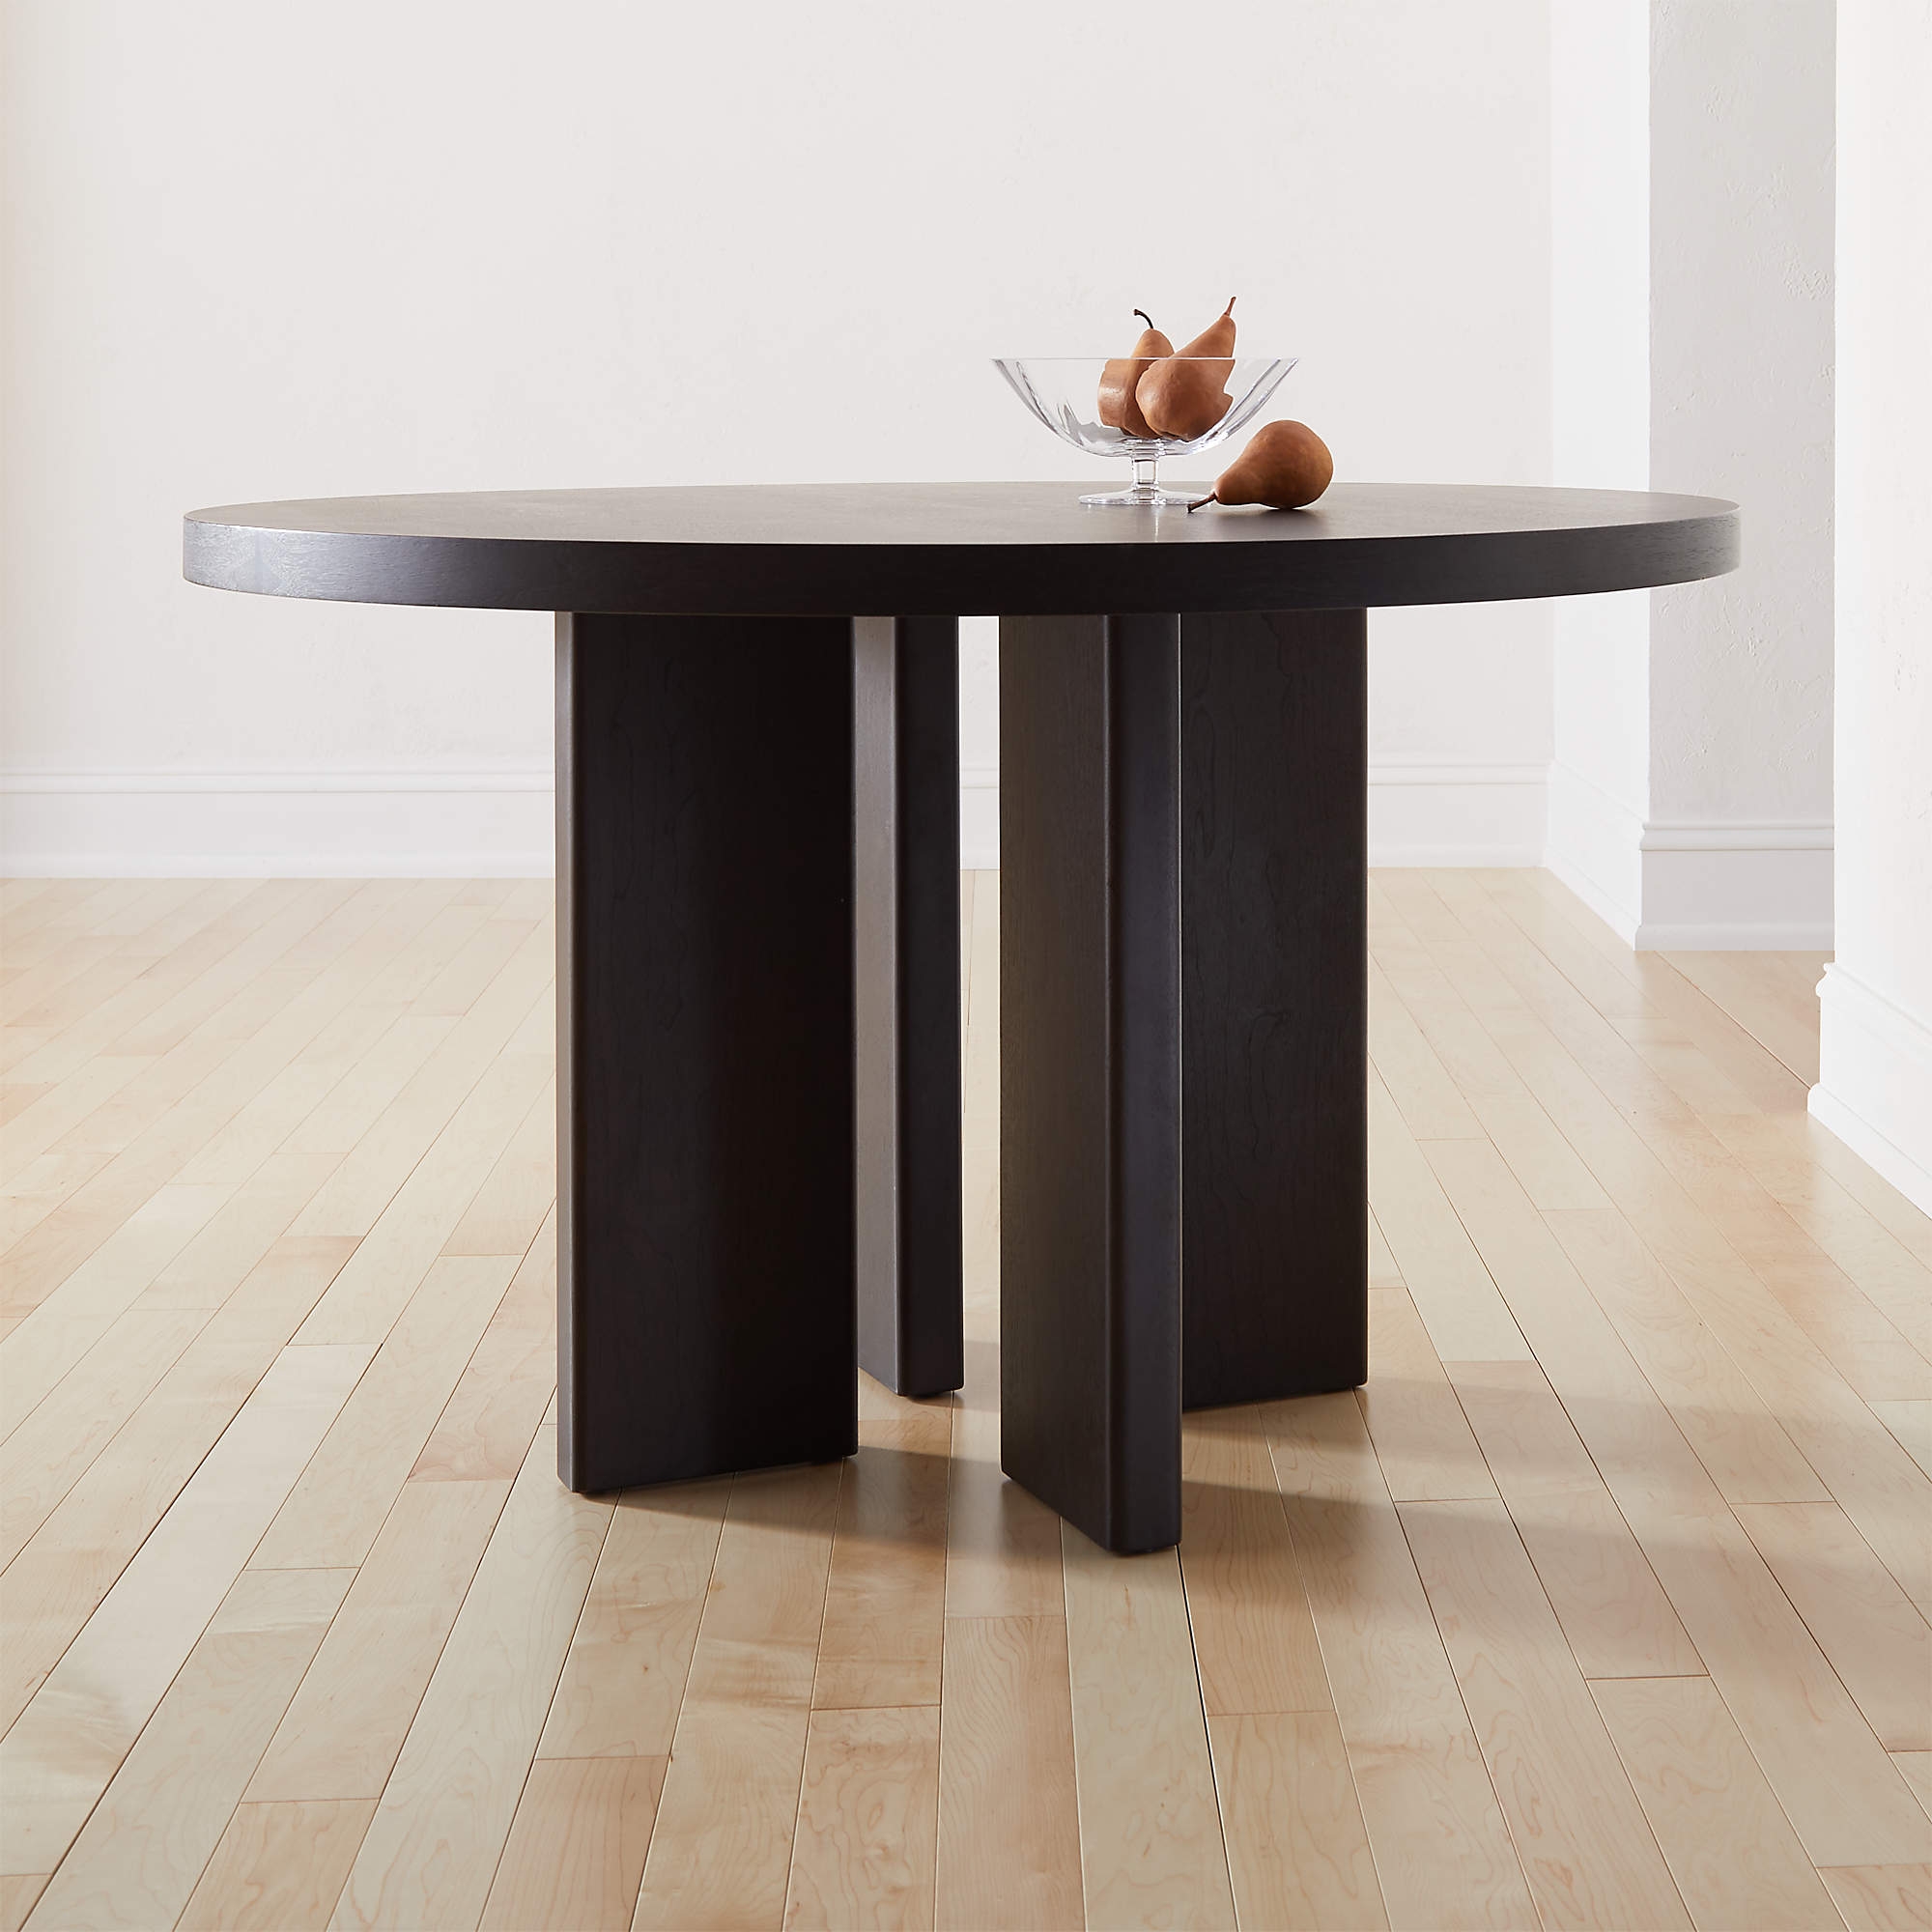 Shadow Blackened Wood Dining Table - Backorder: Late April - Image 4